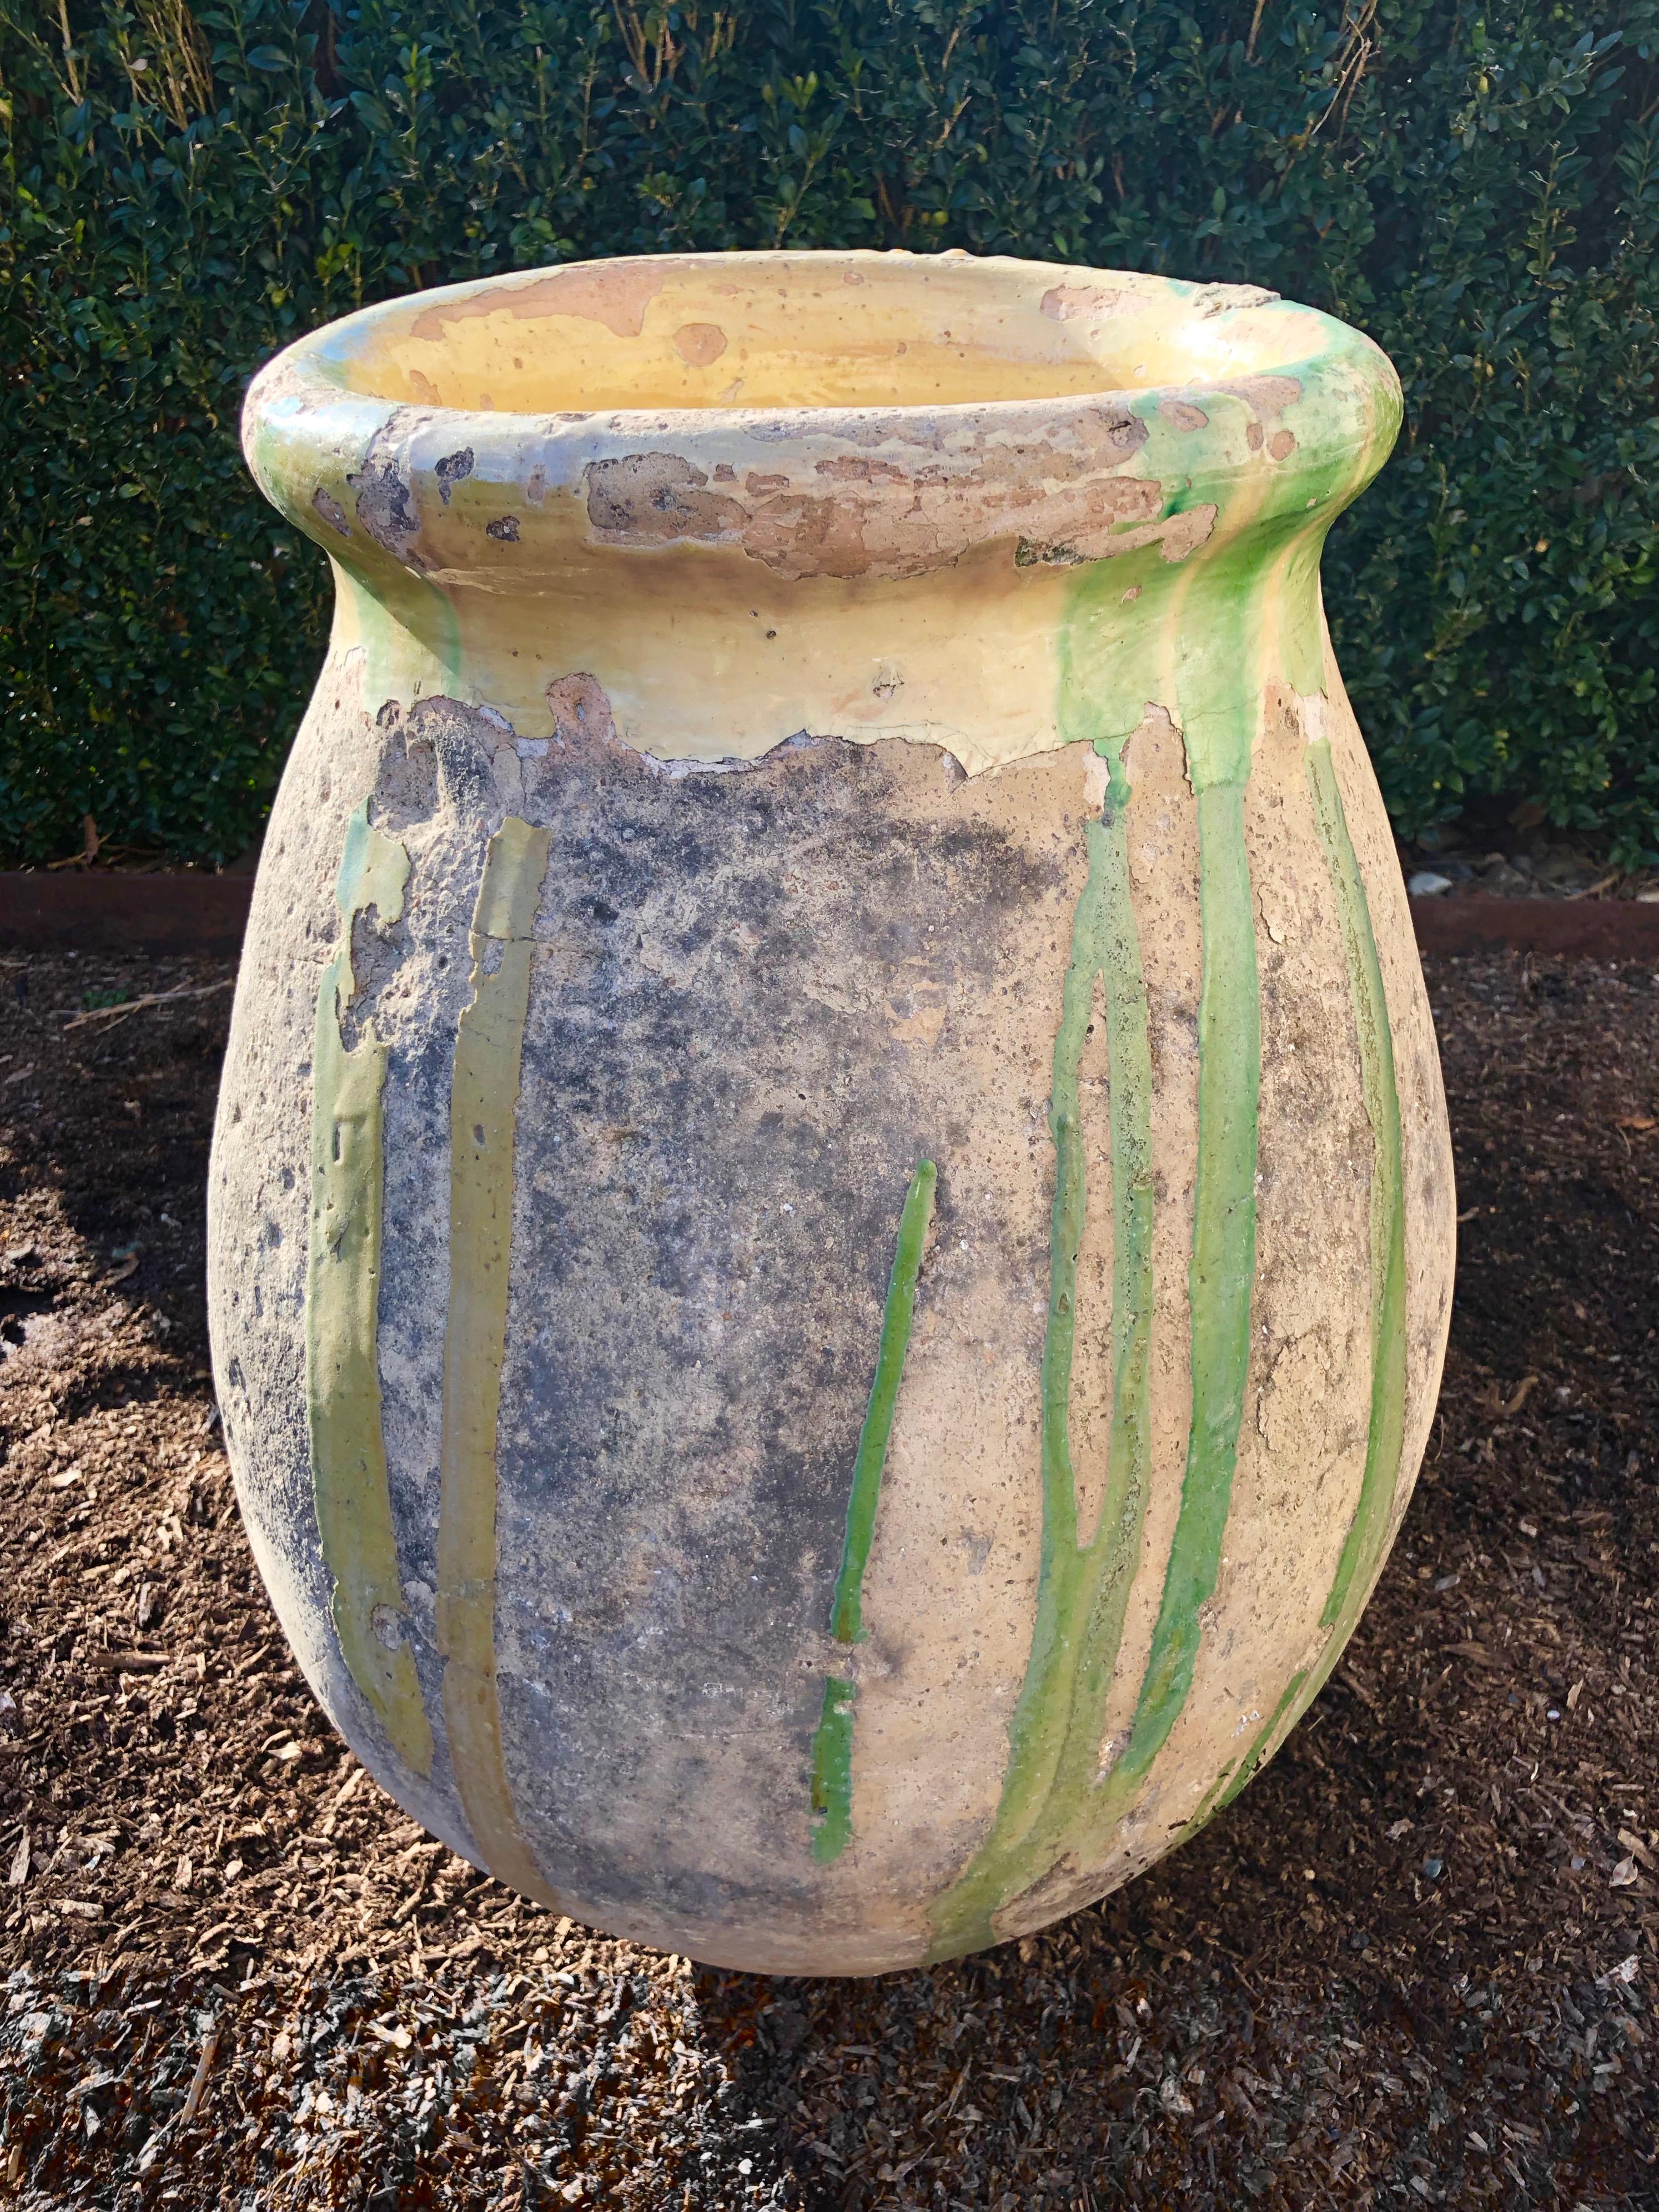 We love Biot Pots in all sizes and glazes and this little one is a rare beauty. Hand-thrown from terracotta in the early 19th century and from the Provençal town of Biot, famous since the 16th century for its jars to hold olive oil, this one has a